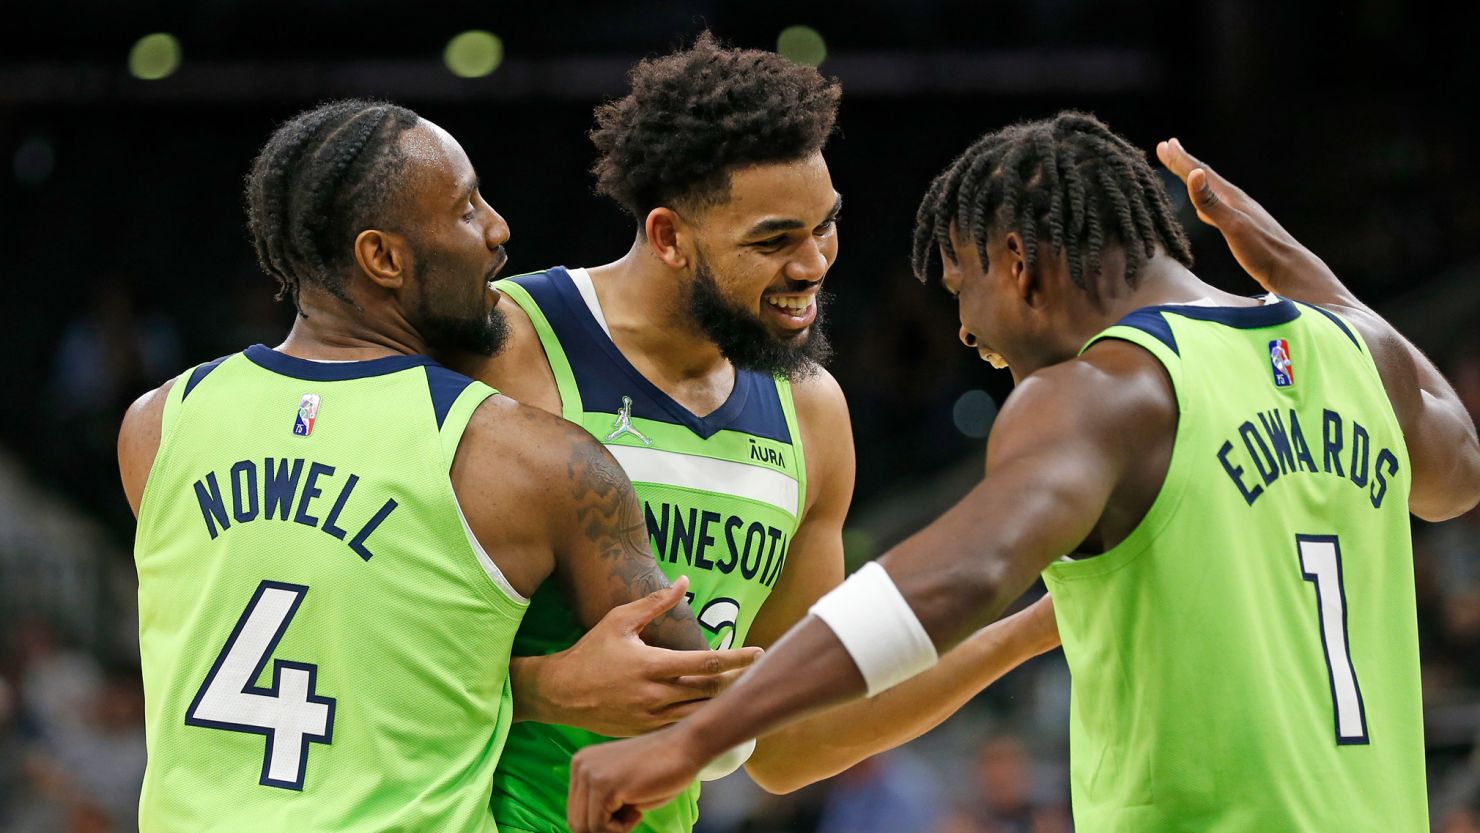 Karl-Anthony Towns receives congratulations from teammates Jaylen Nowell and Anthony Edwards after scoring 60 points against the San Antonio Spurs.